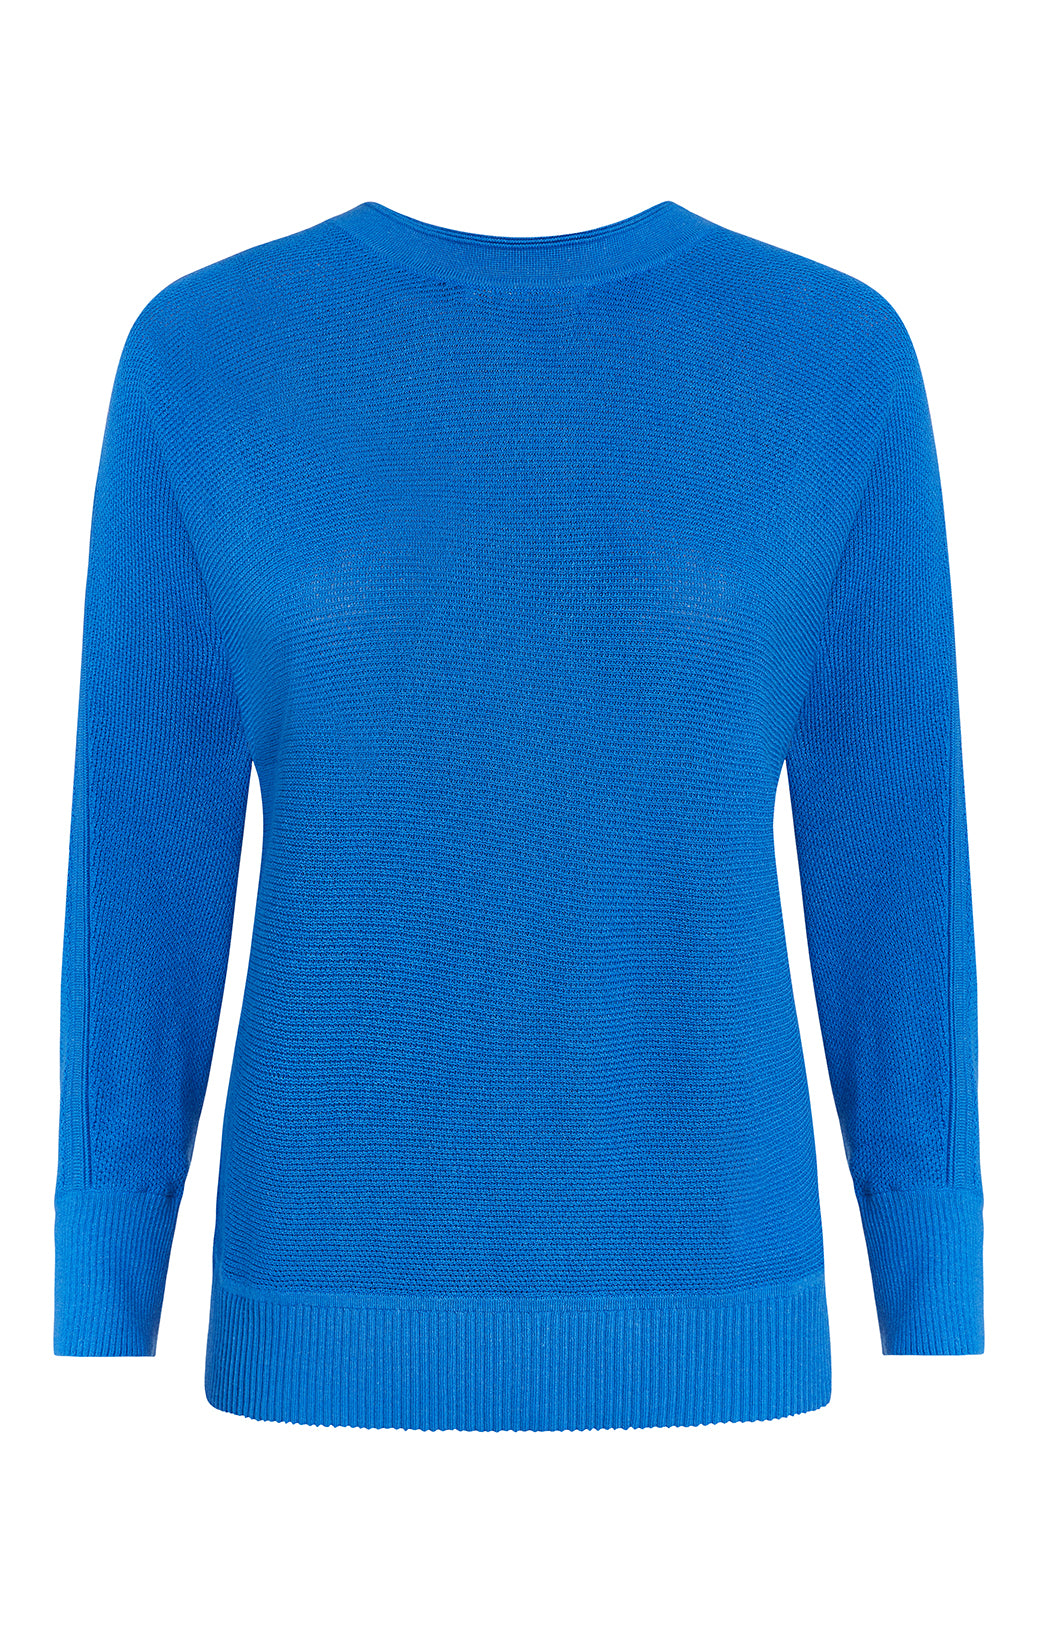 Palm Beach - Hooded Knit Top With Petal Cutouts - Product Image